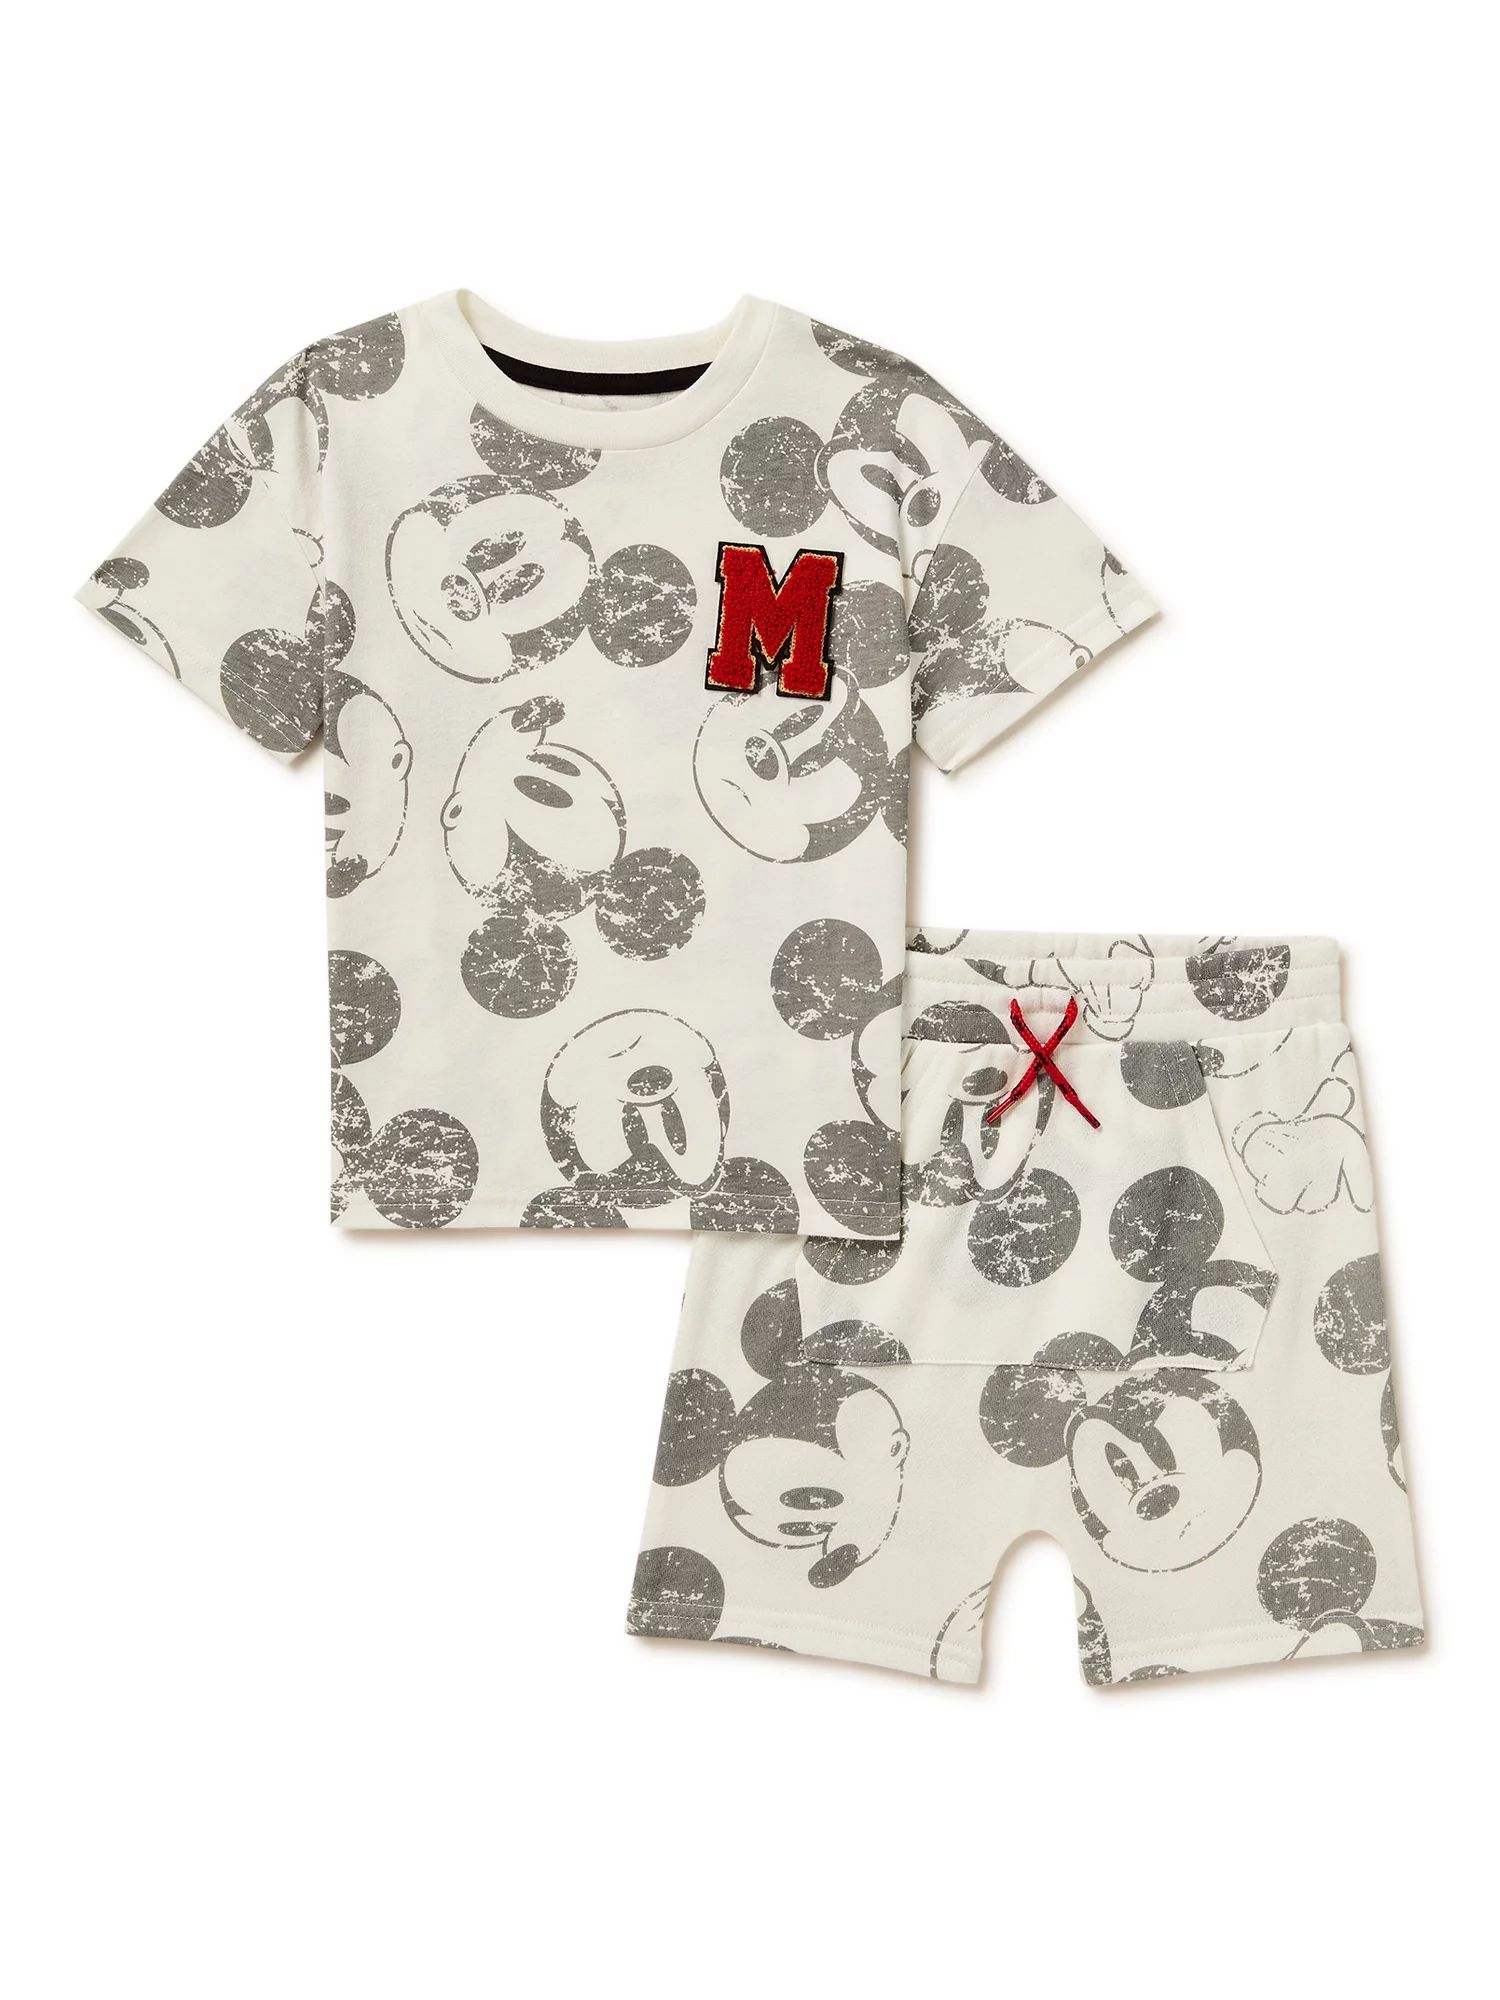 Disney Mickey Mouse Toddler Boys T-Shirt and Shorts, 2-Piece Set, Sizes 12 Months-5T | Walmart (US)